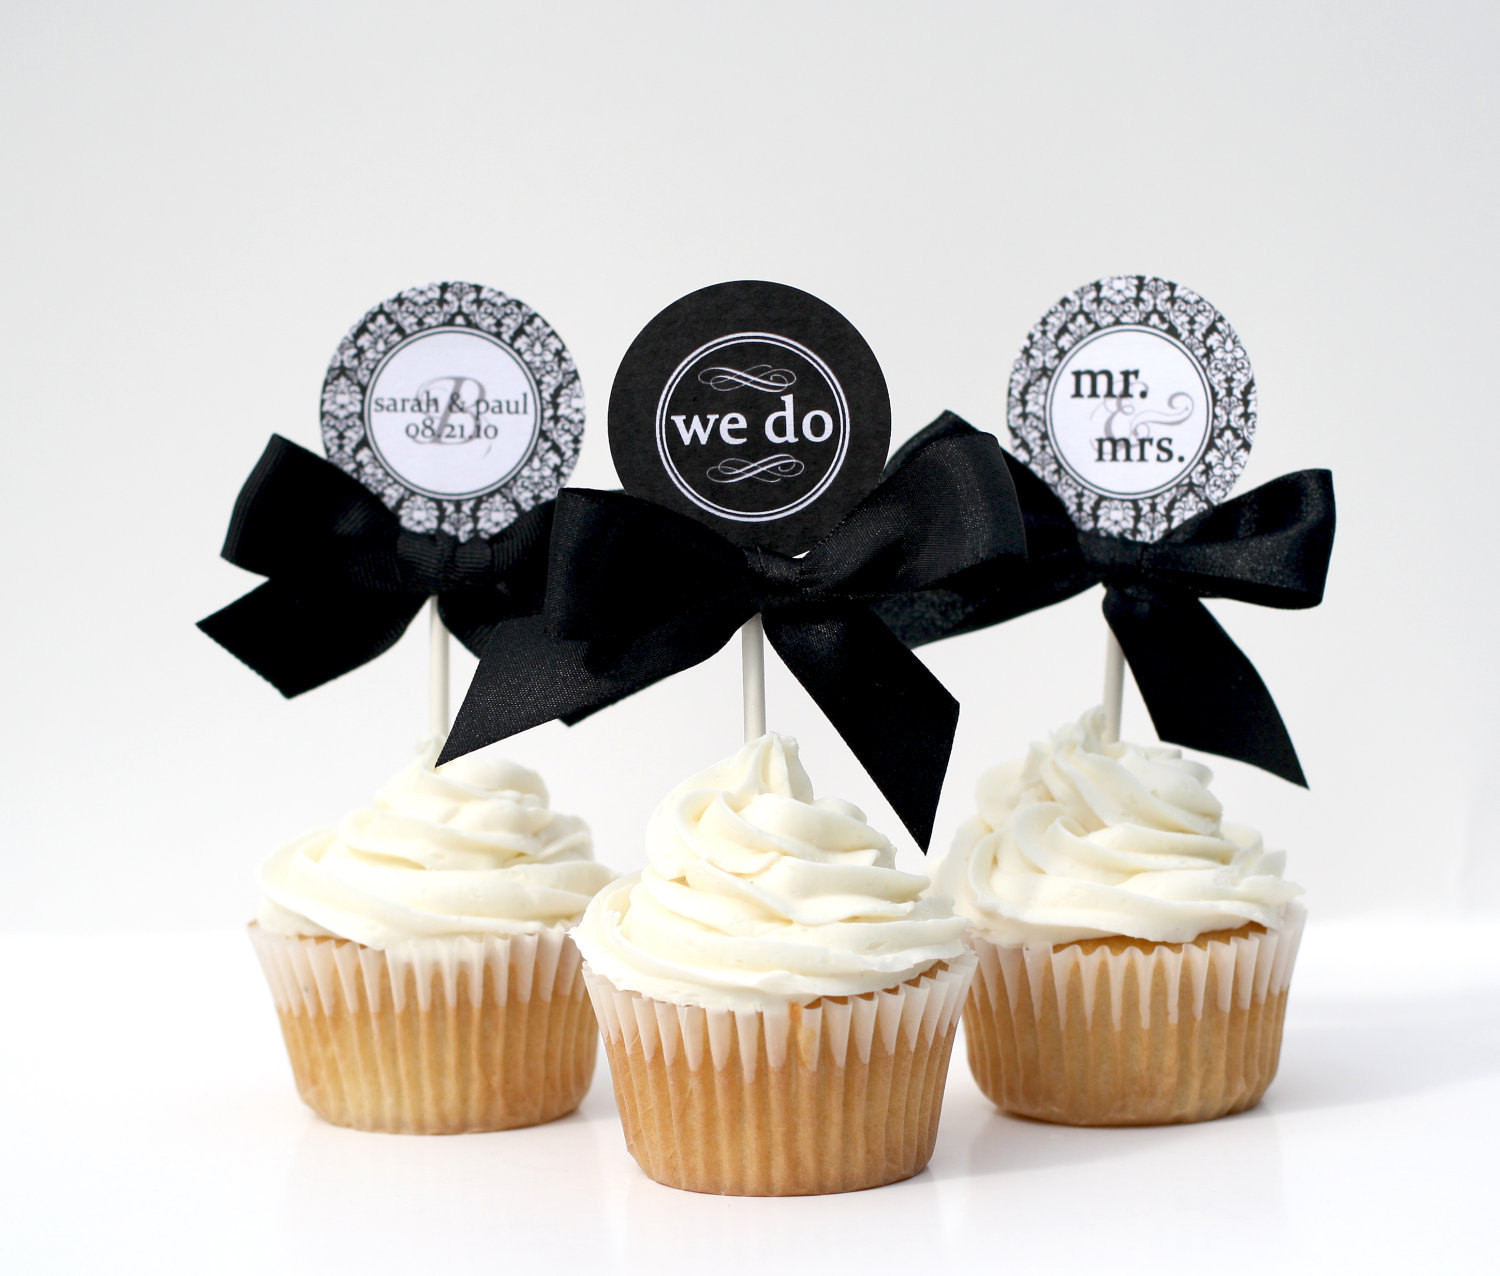 Wedding Cupcake Decorations
 Wedding Bridal Shower Cupcake Toppers WE by